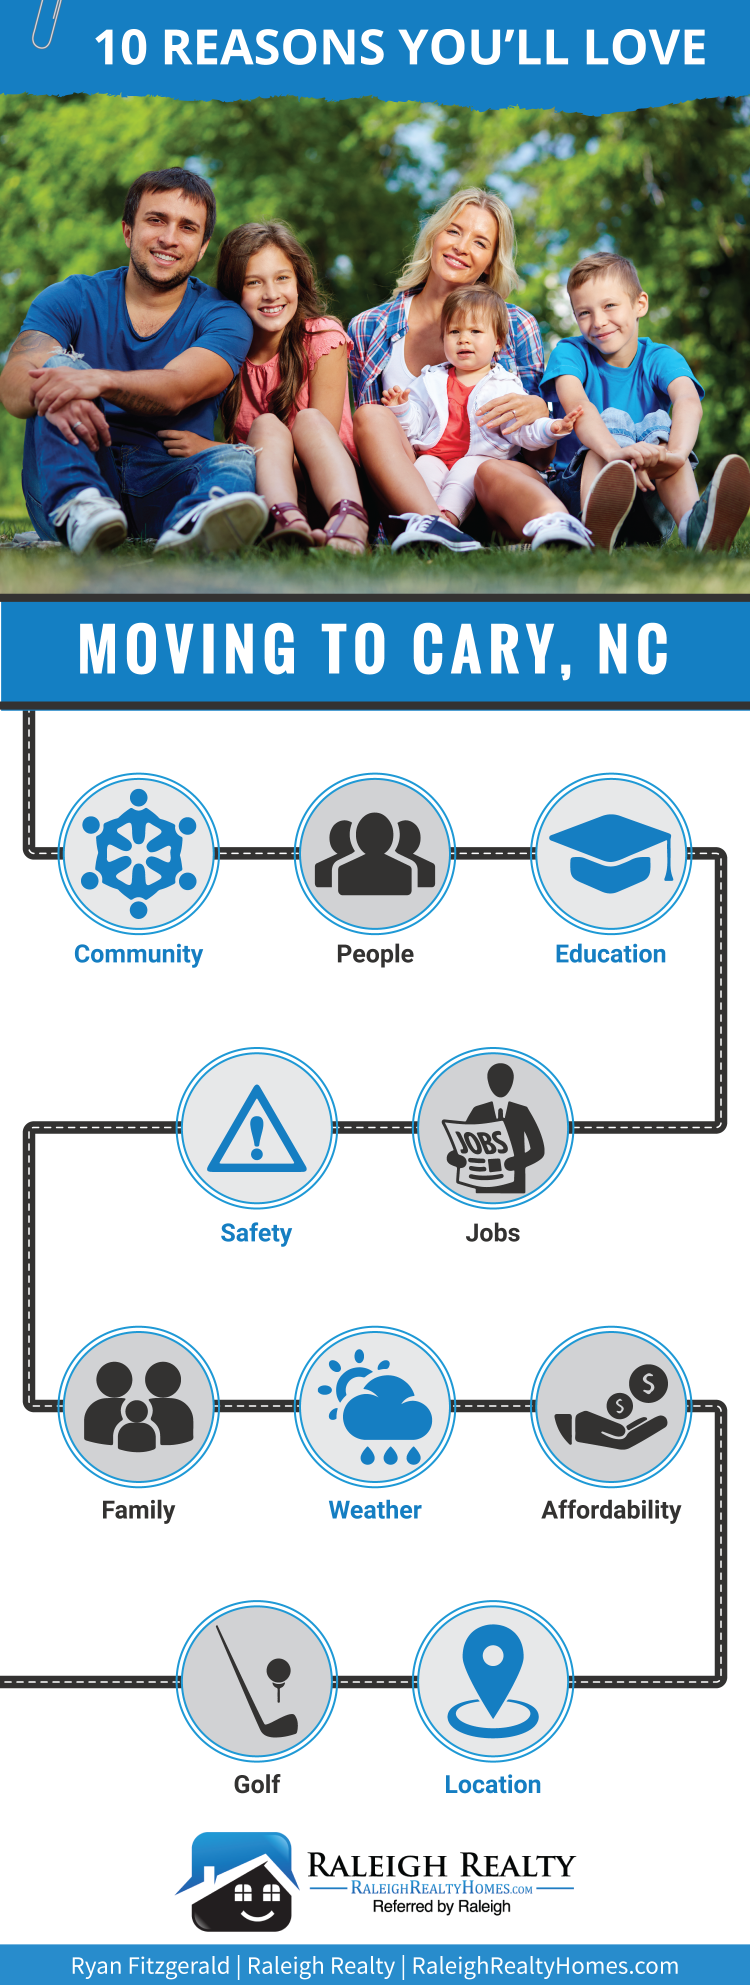 Moving-to-Cary-NC-Infographic